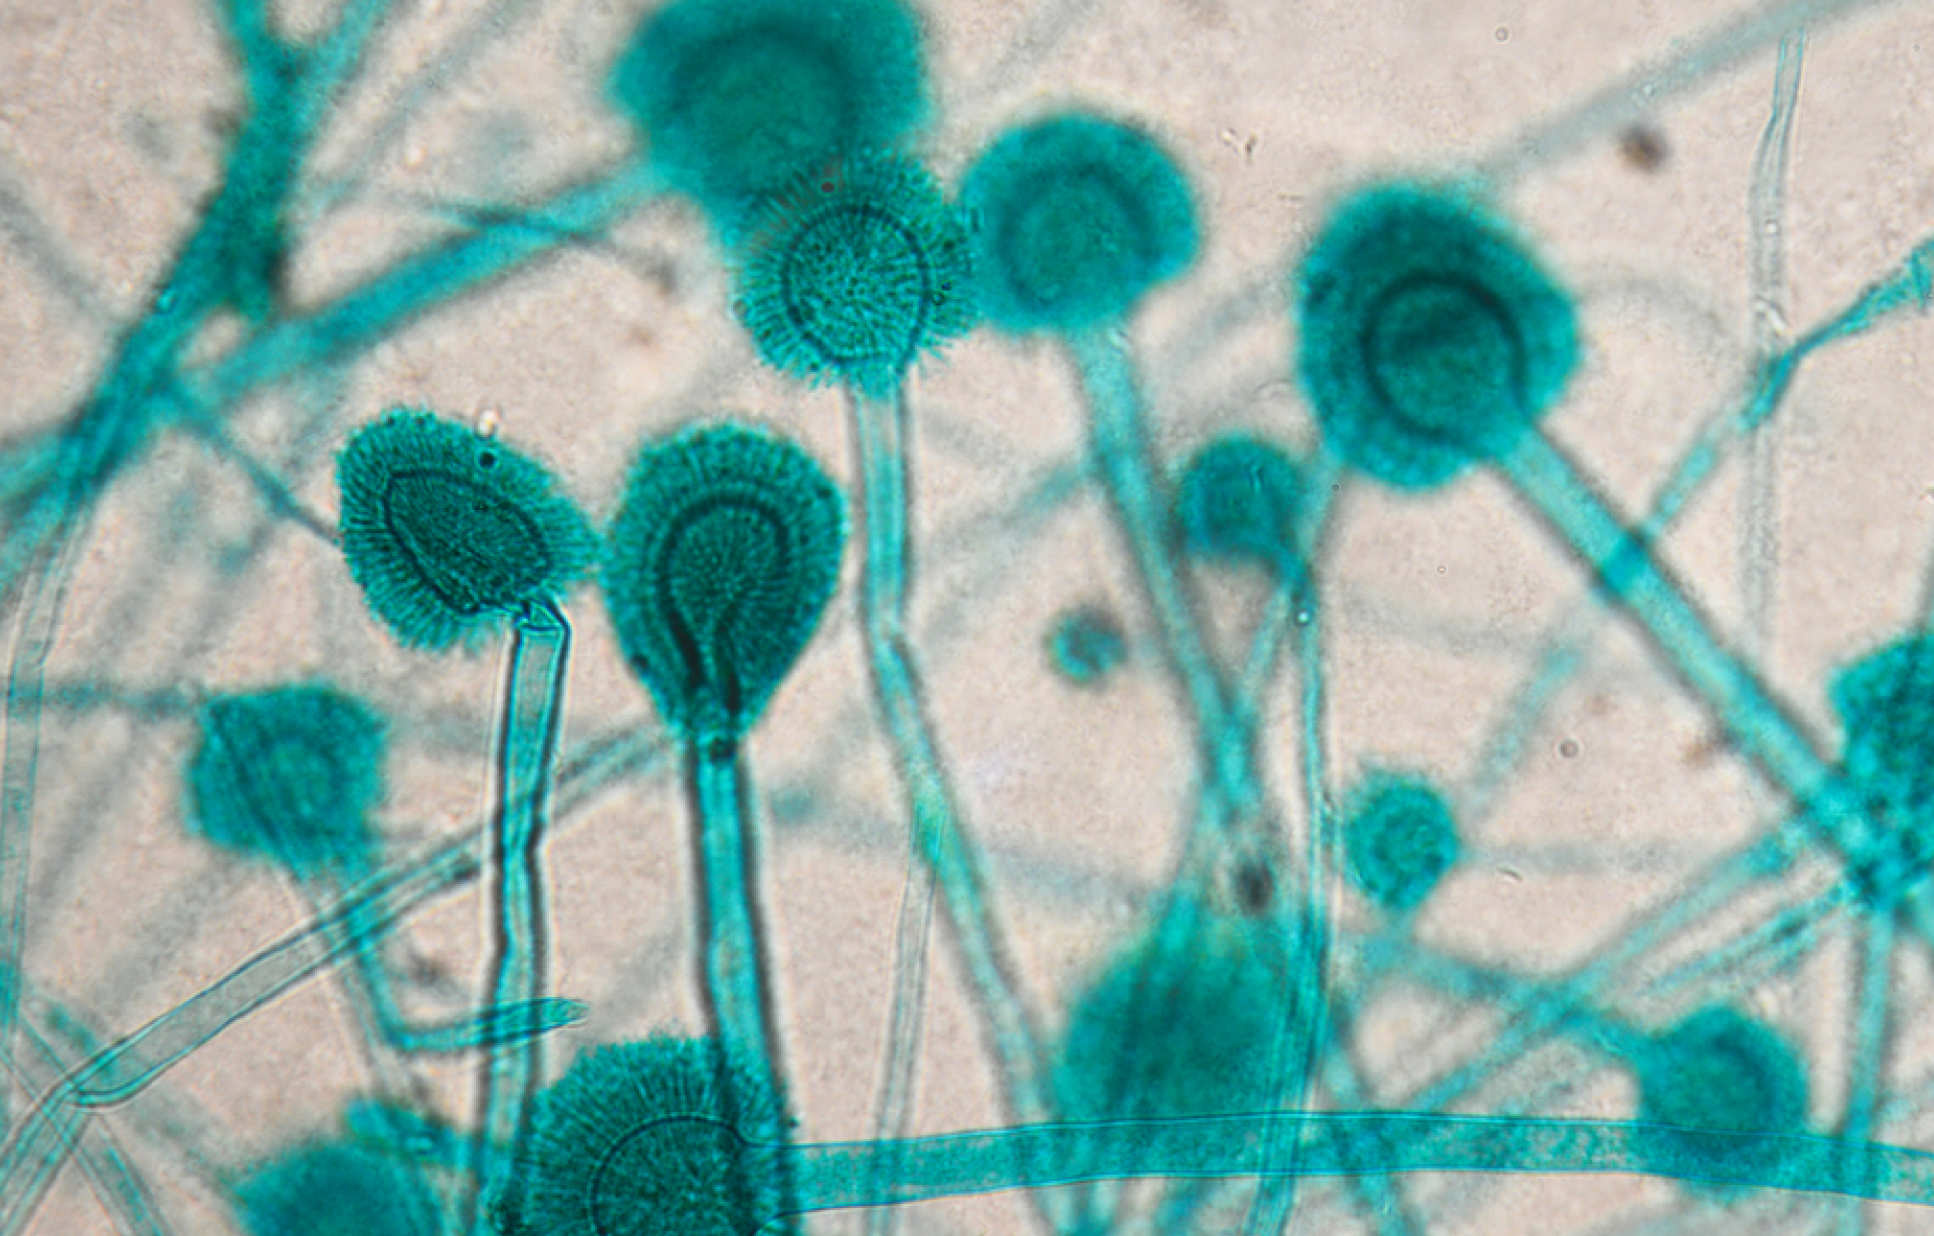 Aspergillus fumigatus thrive on decaying vegetation but are also able to infect those with compromised immune systems, such as cancer patients or those who have received organ transplants